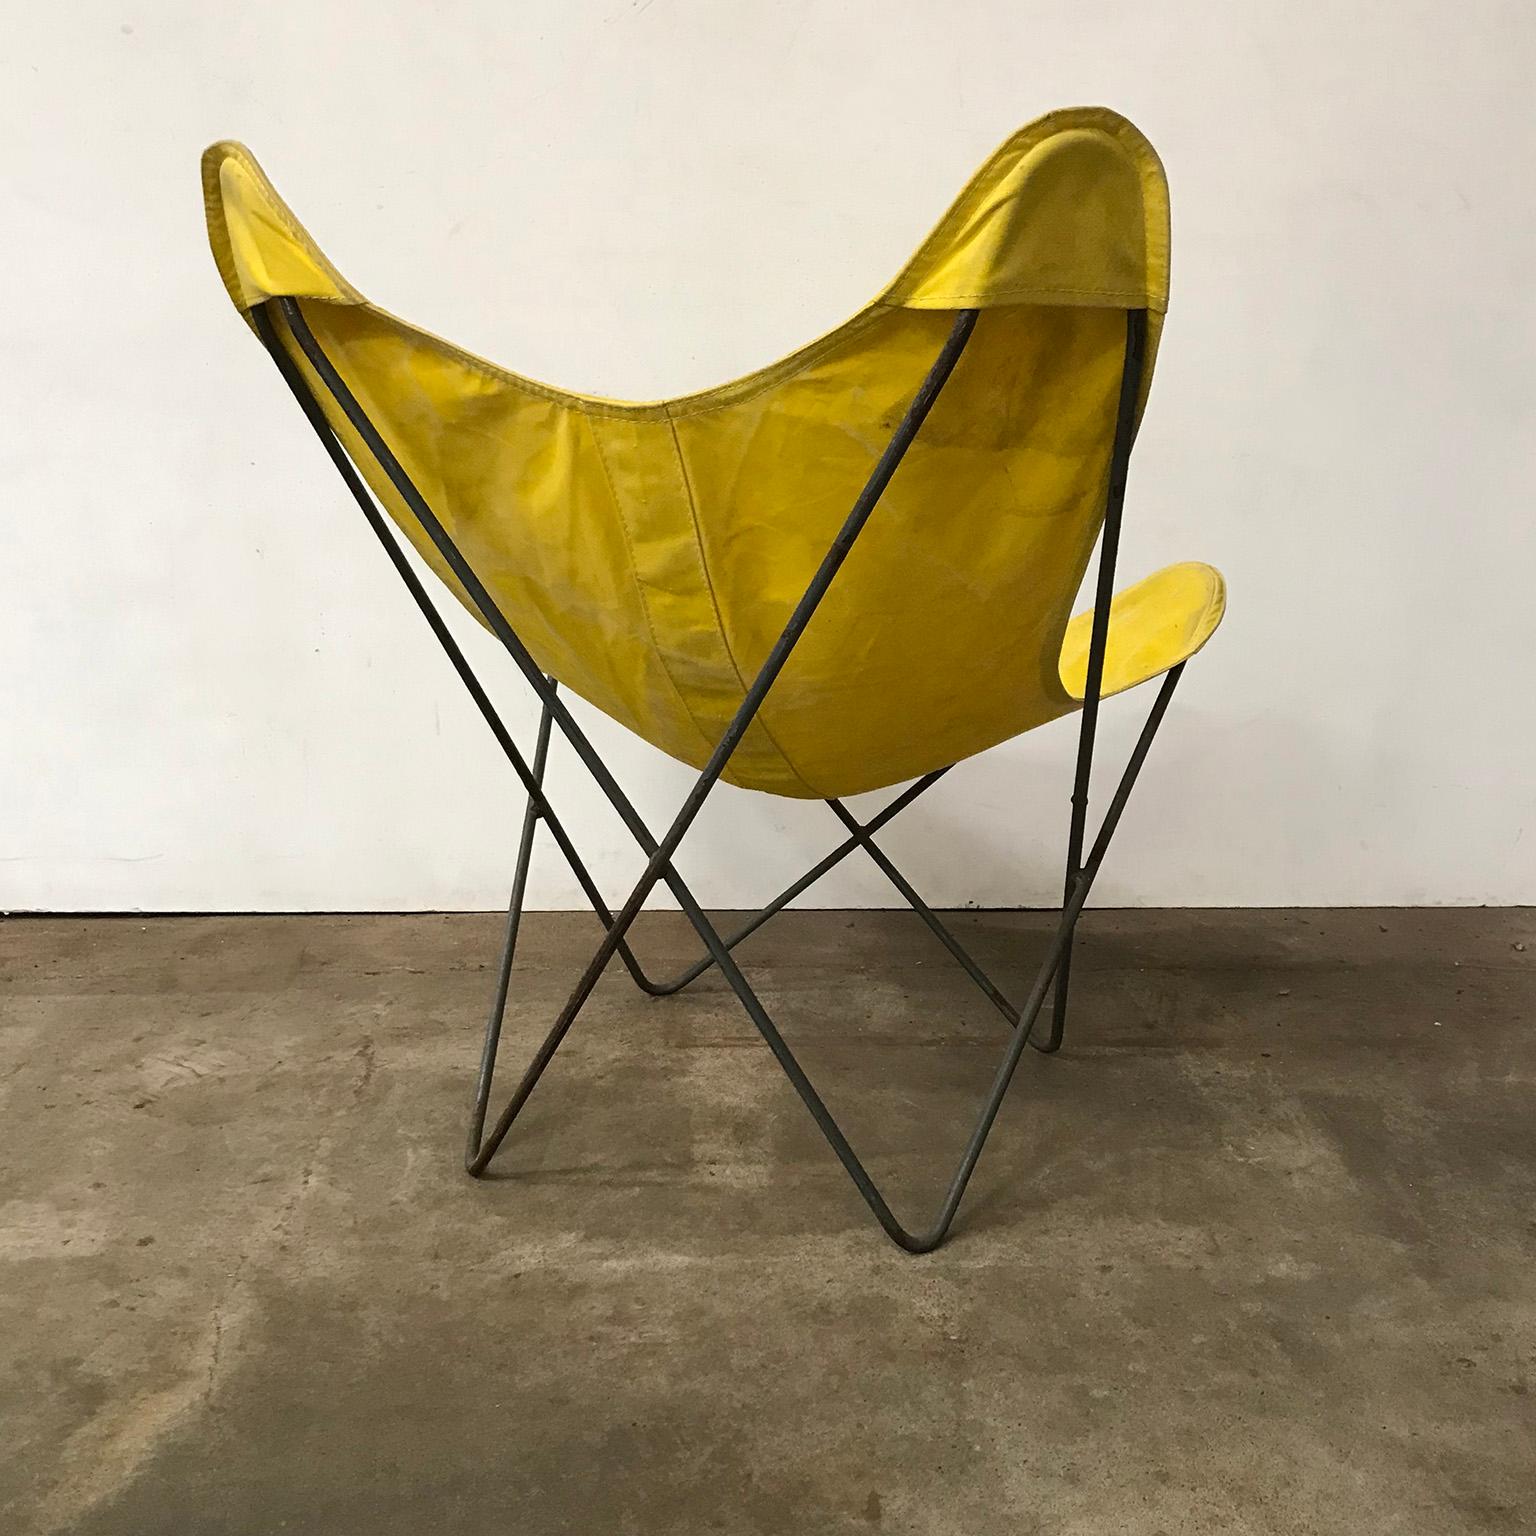 Industrial 1947, Hardoy, Ferrari, Yellow Cover with Black Base Butterfly Chair